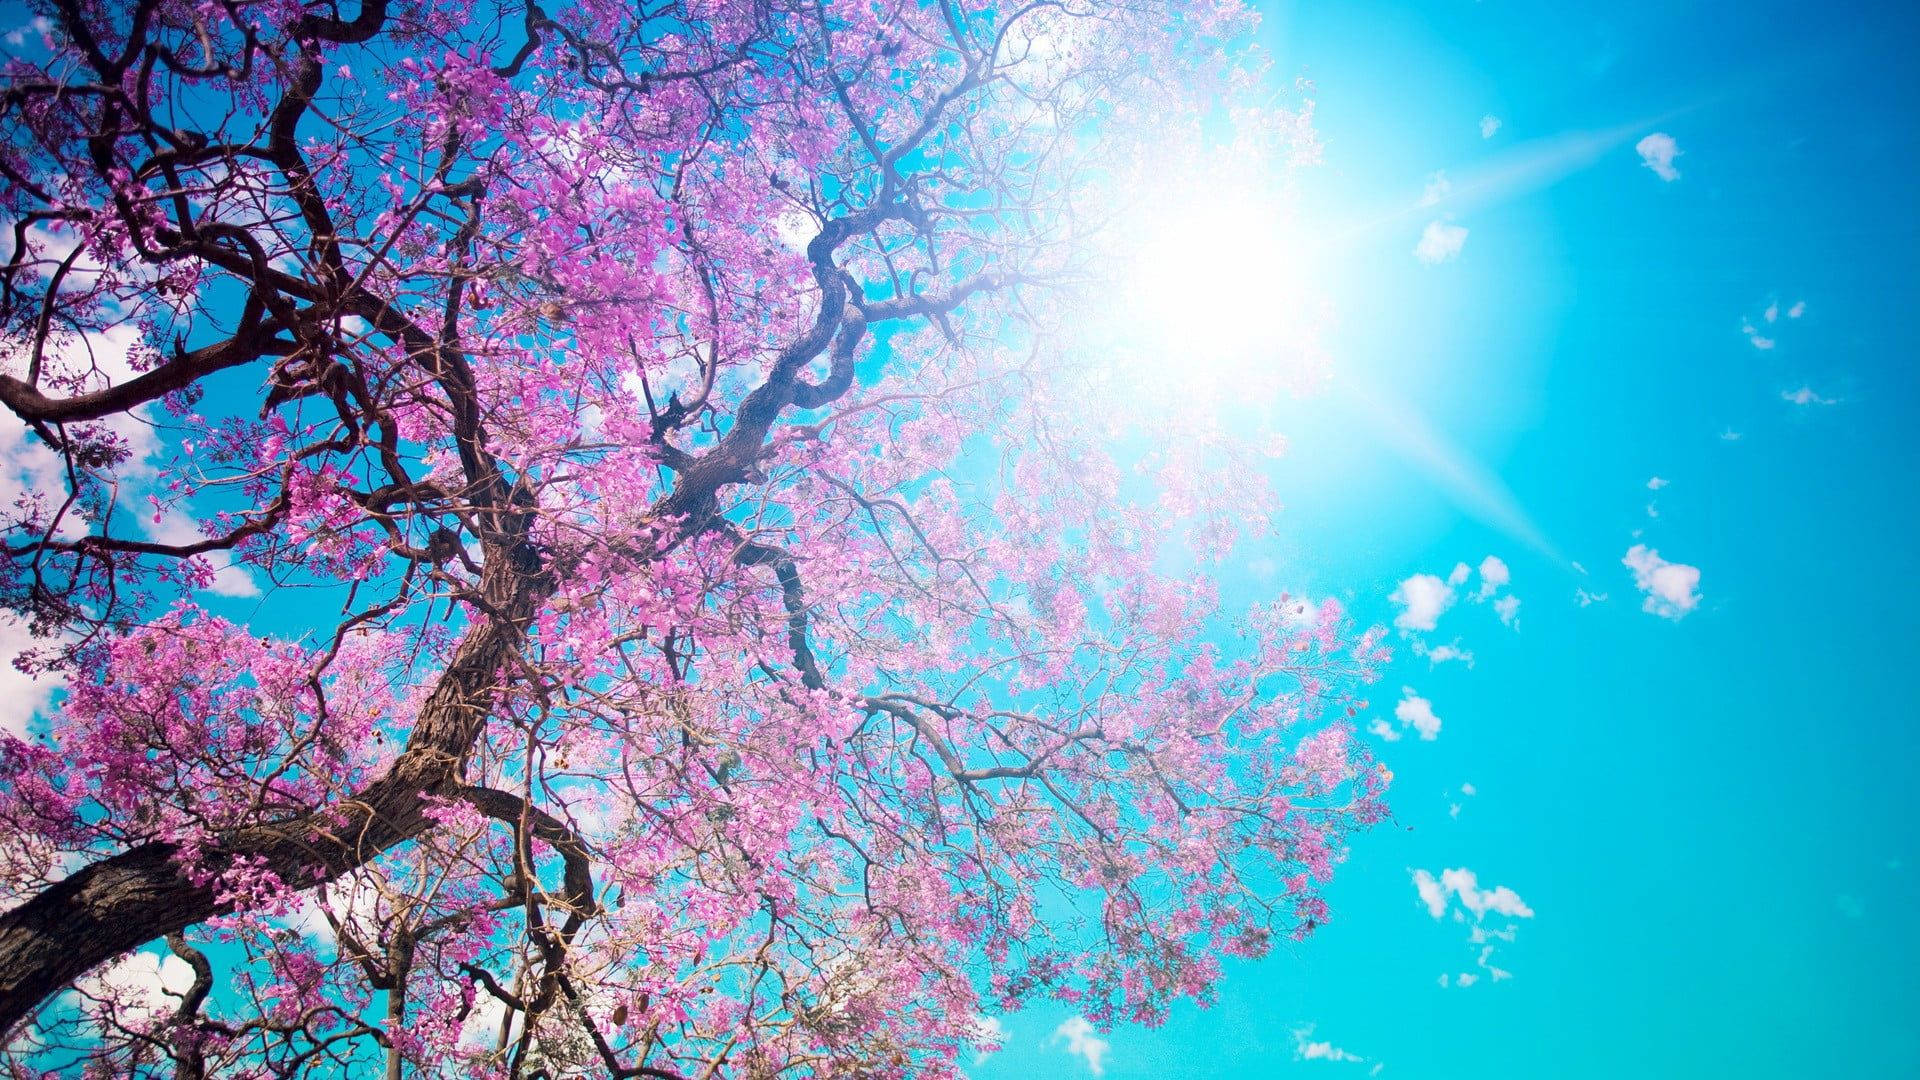 Sunny Weather With Cherry Blossom Background